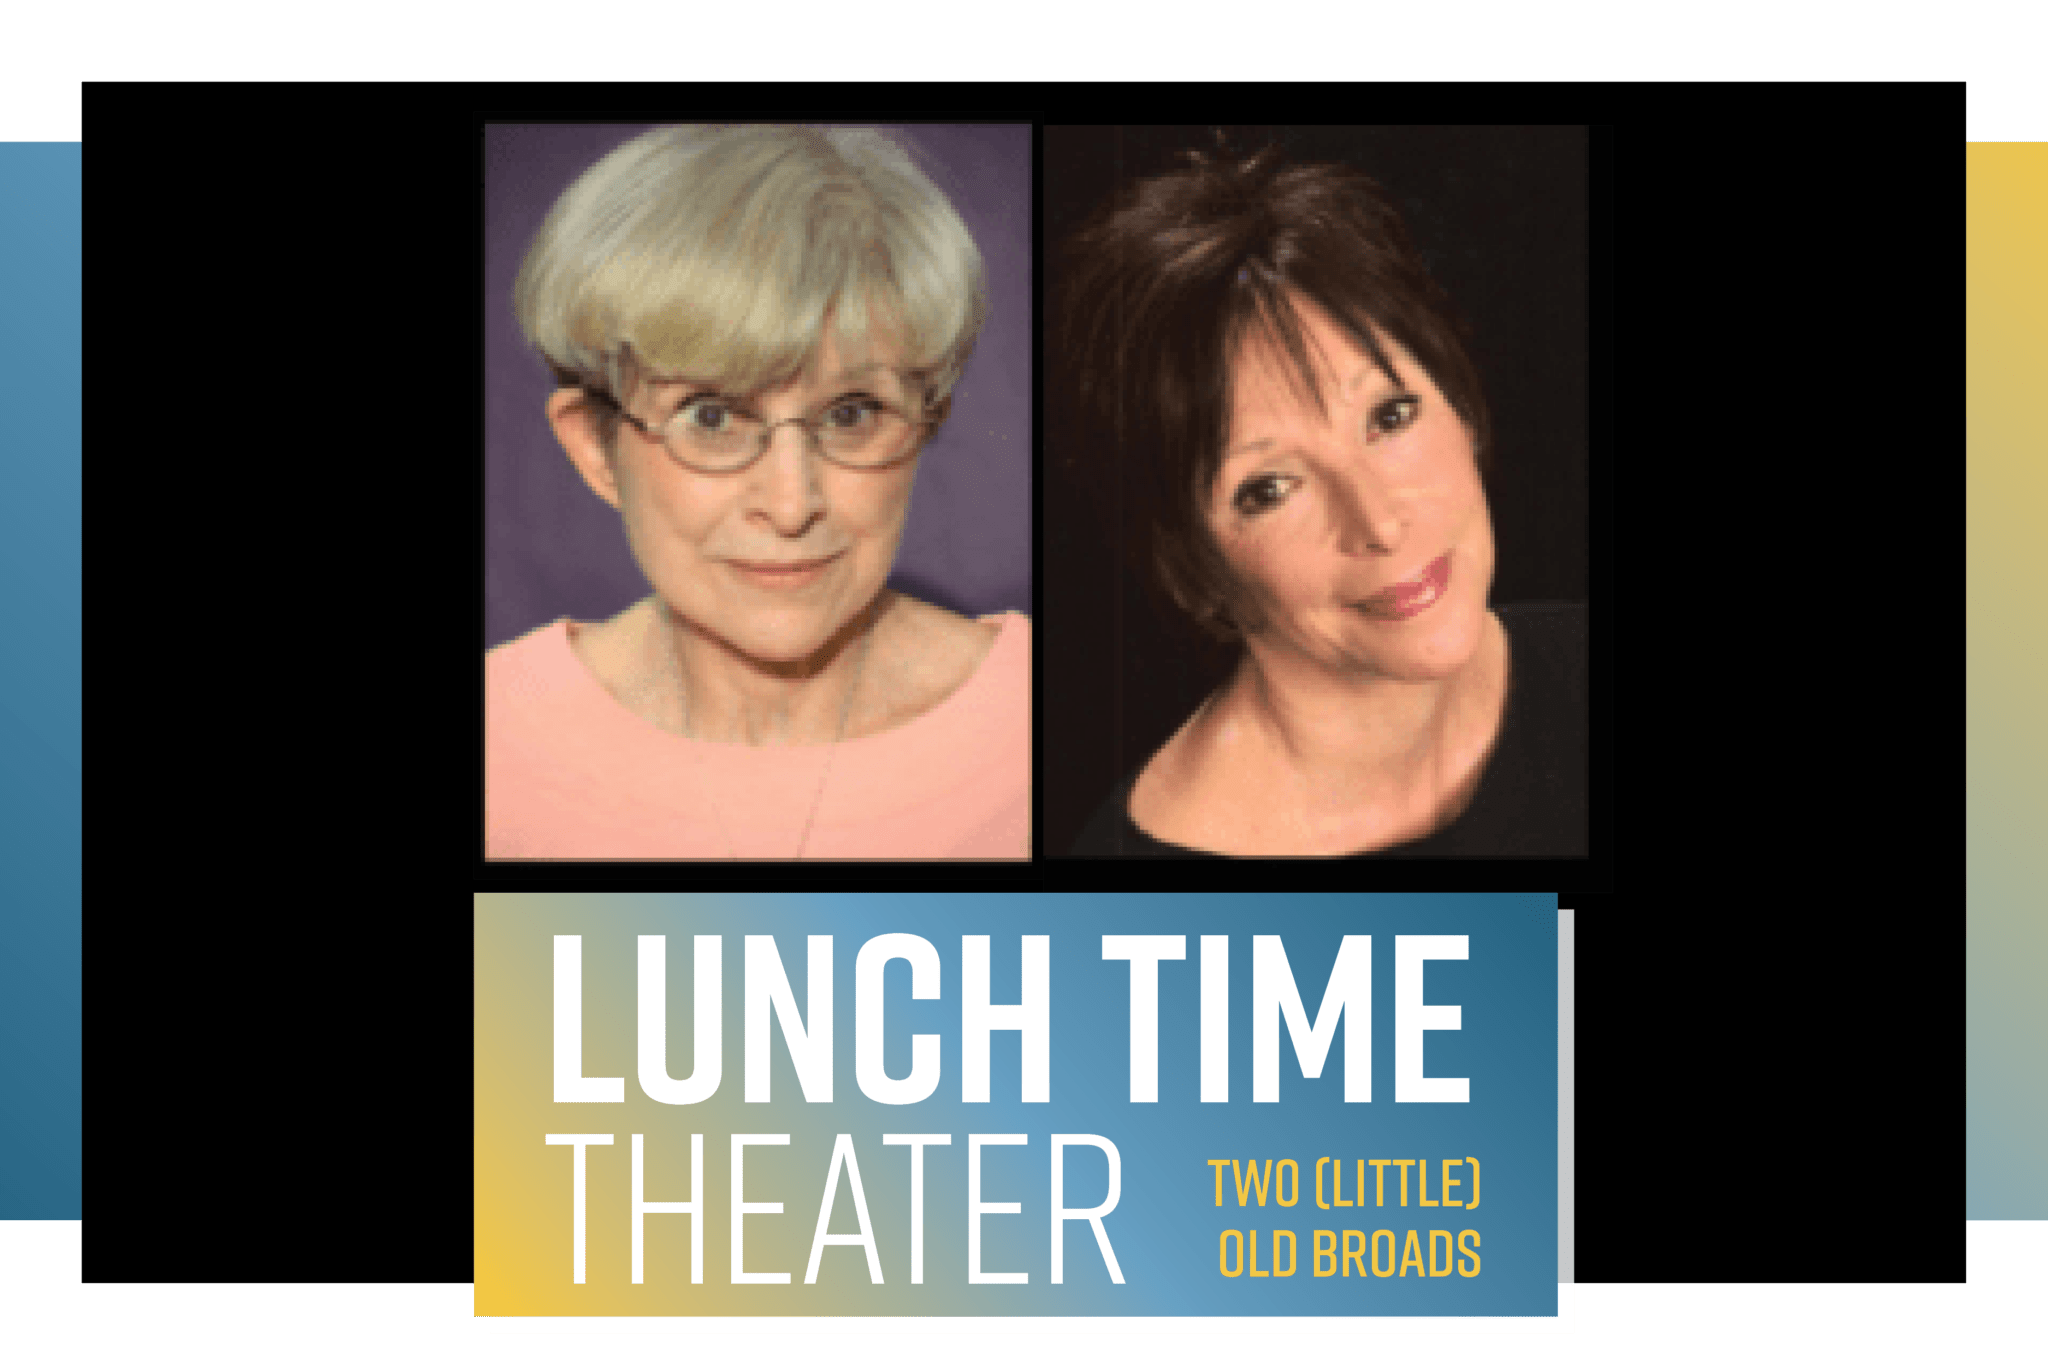 Two (little) Old Broads – Lunch Time Theater Poster Image